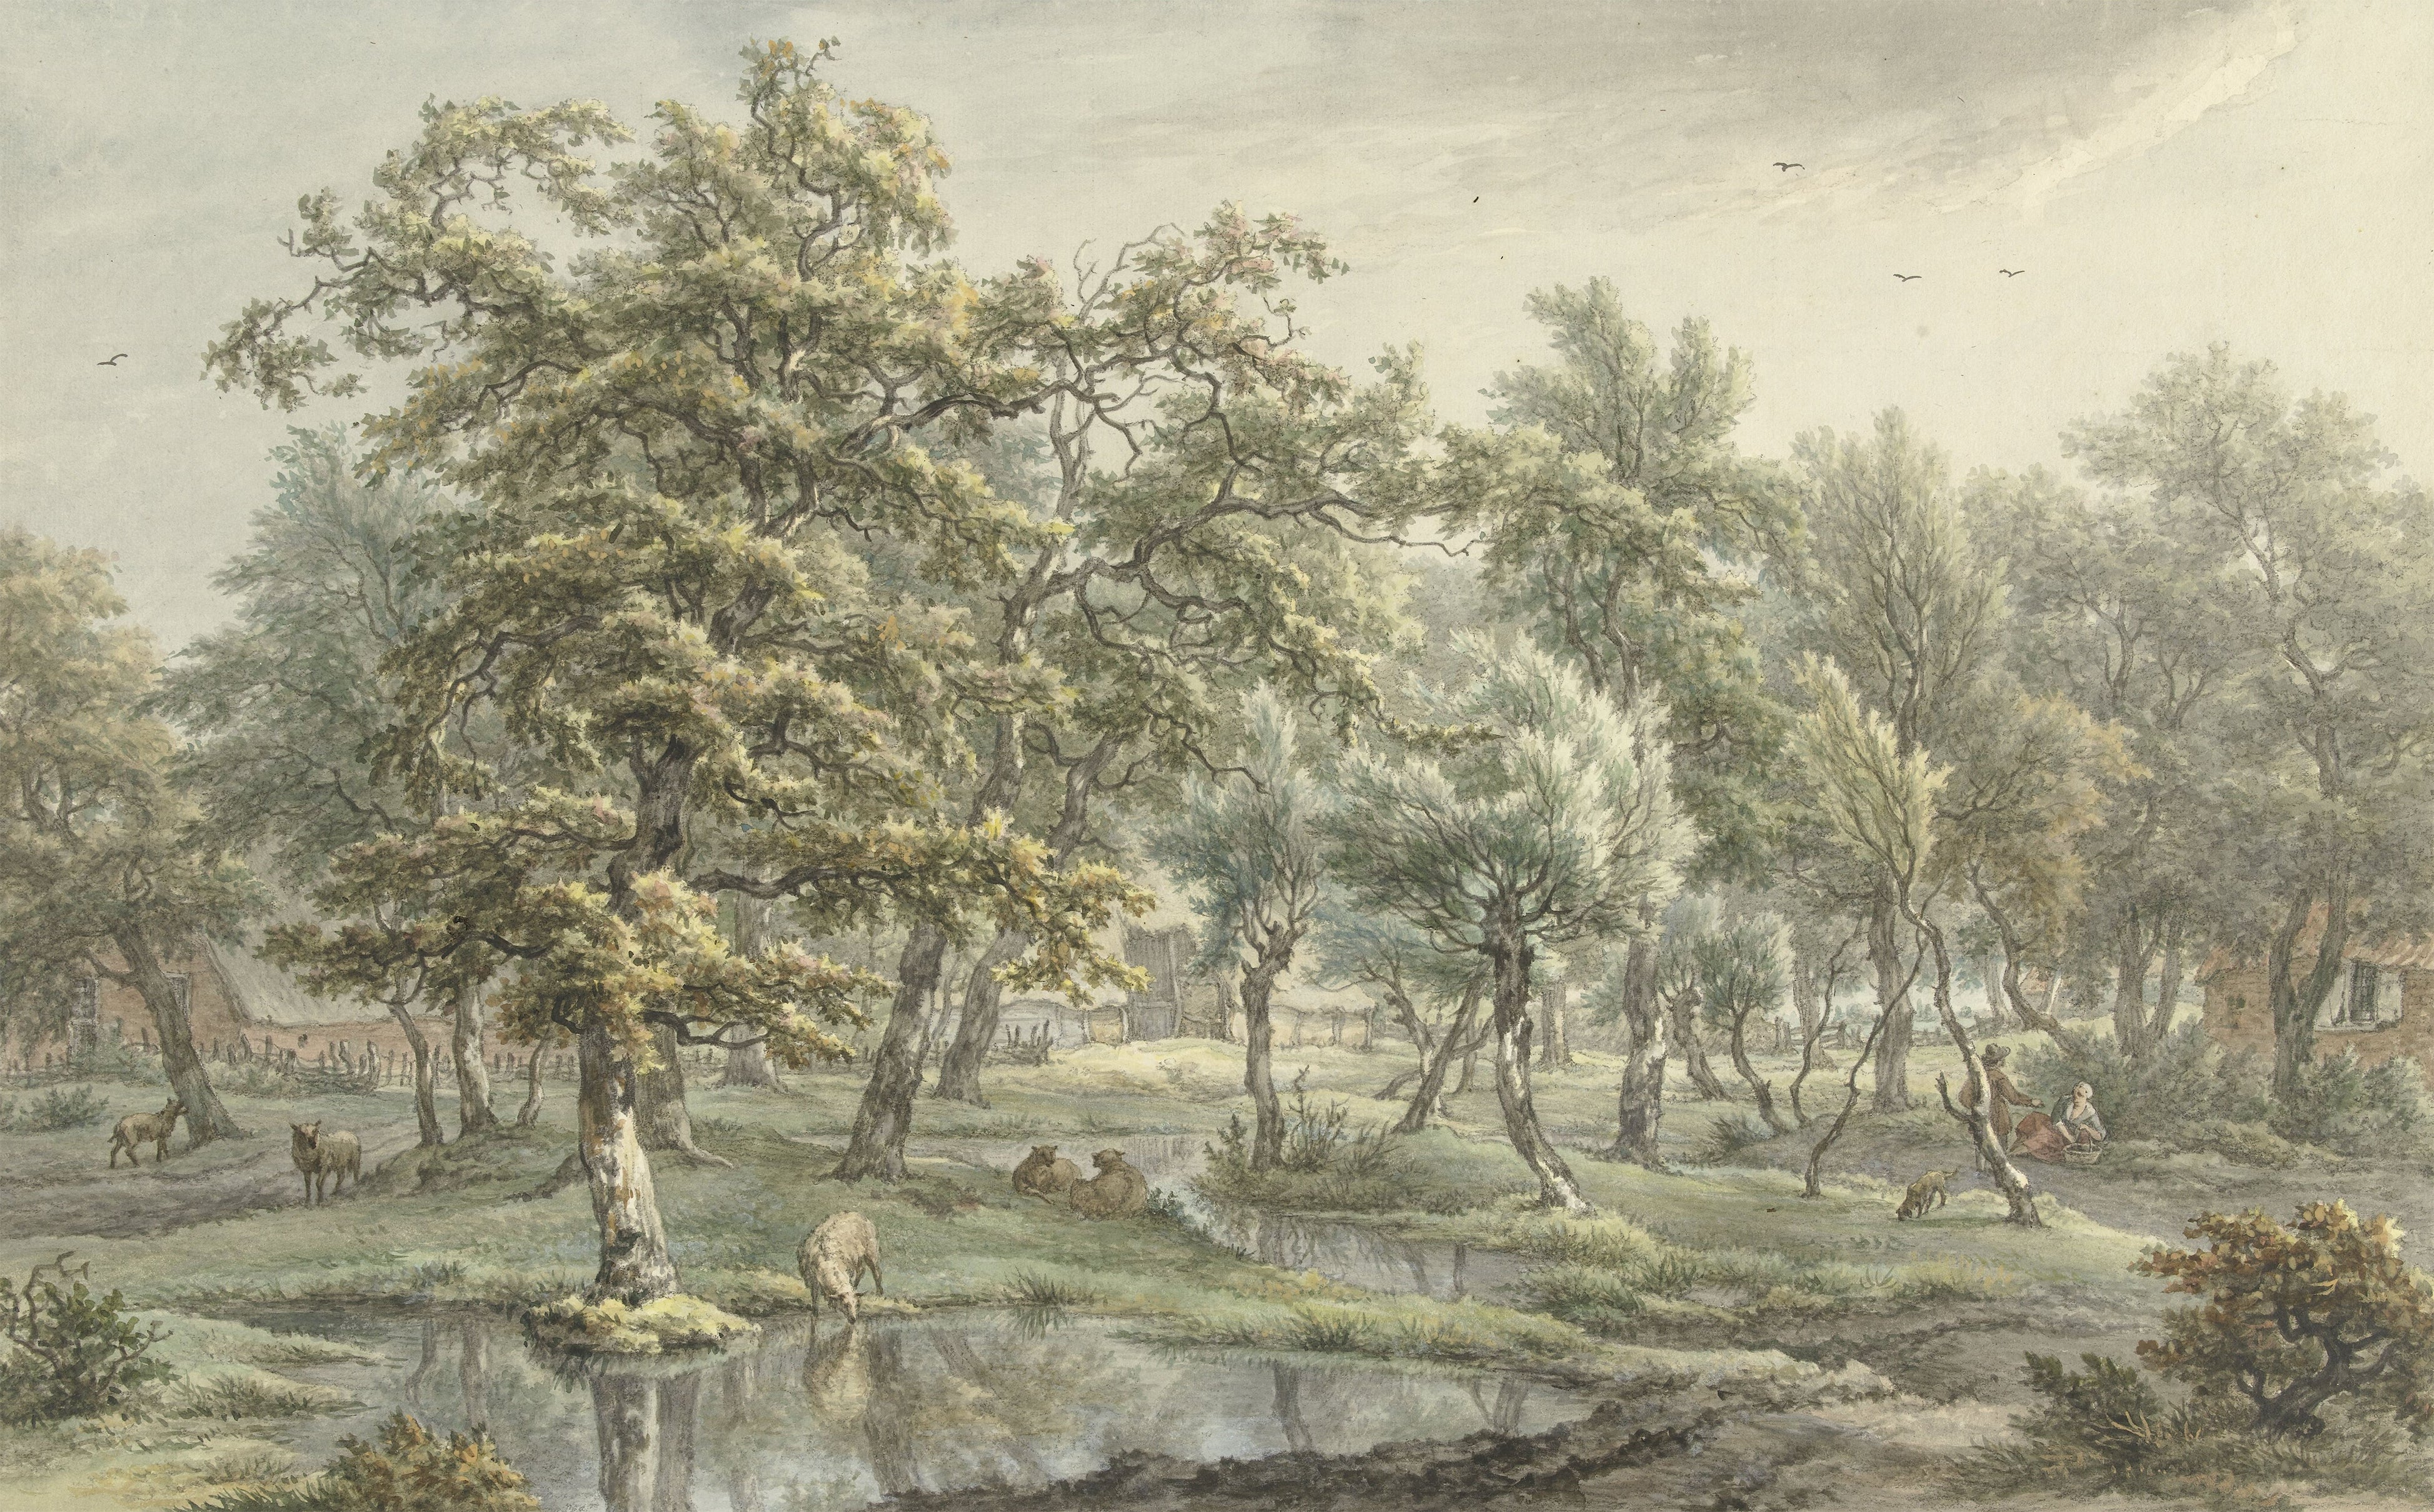 A detailed segment of the 'Landscape in Eext - Vintage Wall Mural', showcasing intricate artwork with diverse tree species, shrubbery, and figures in period clothing, reflecting the tranquil Dutch countryside of the late 18th century.